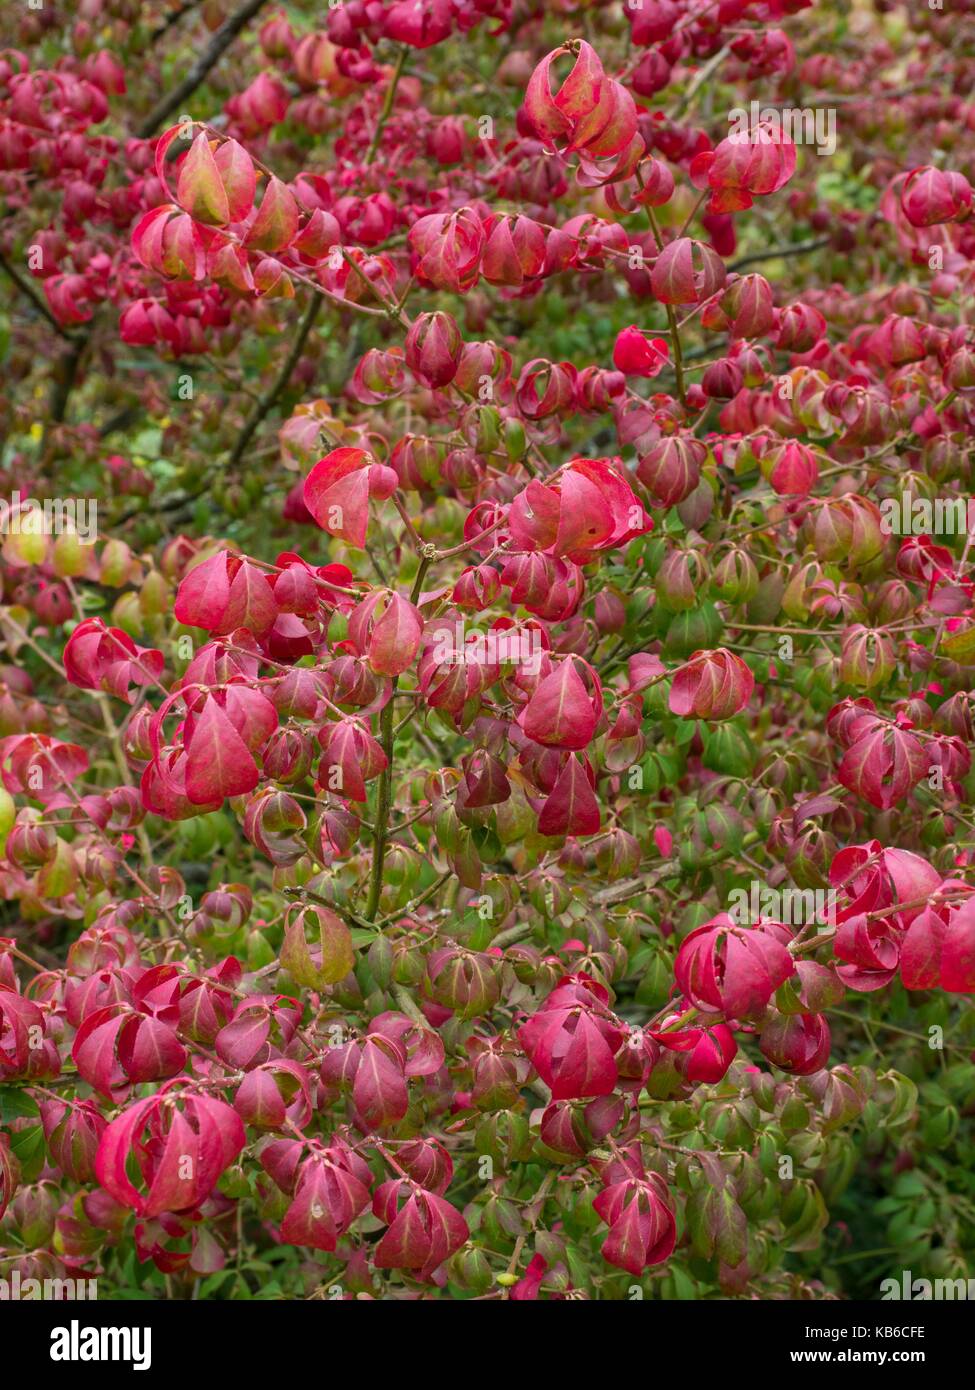 Euonymus alatus, winged spindle tree Banque D'Images